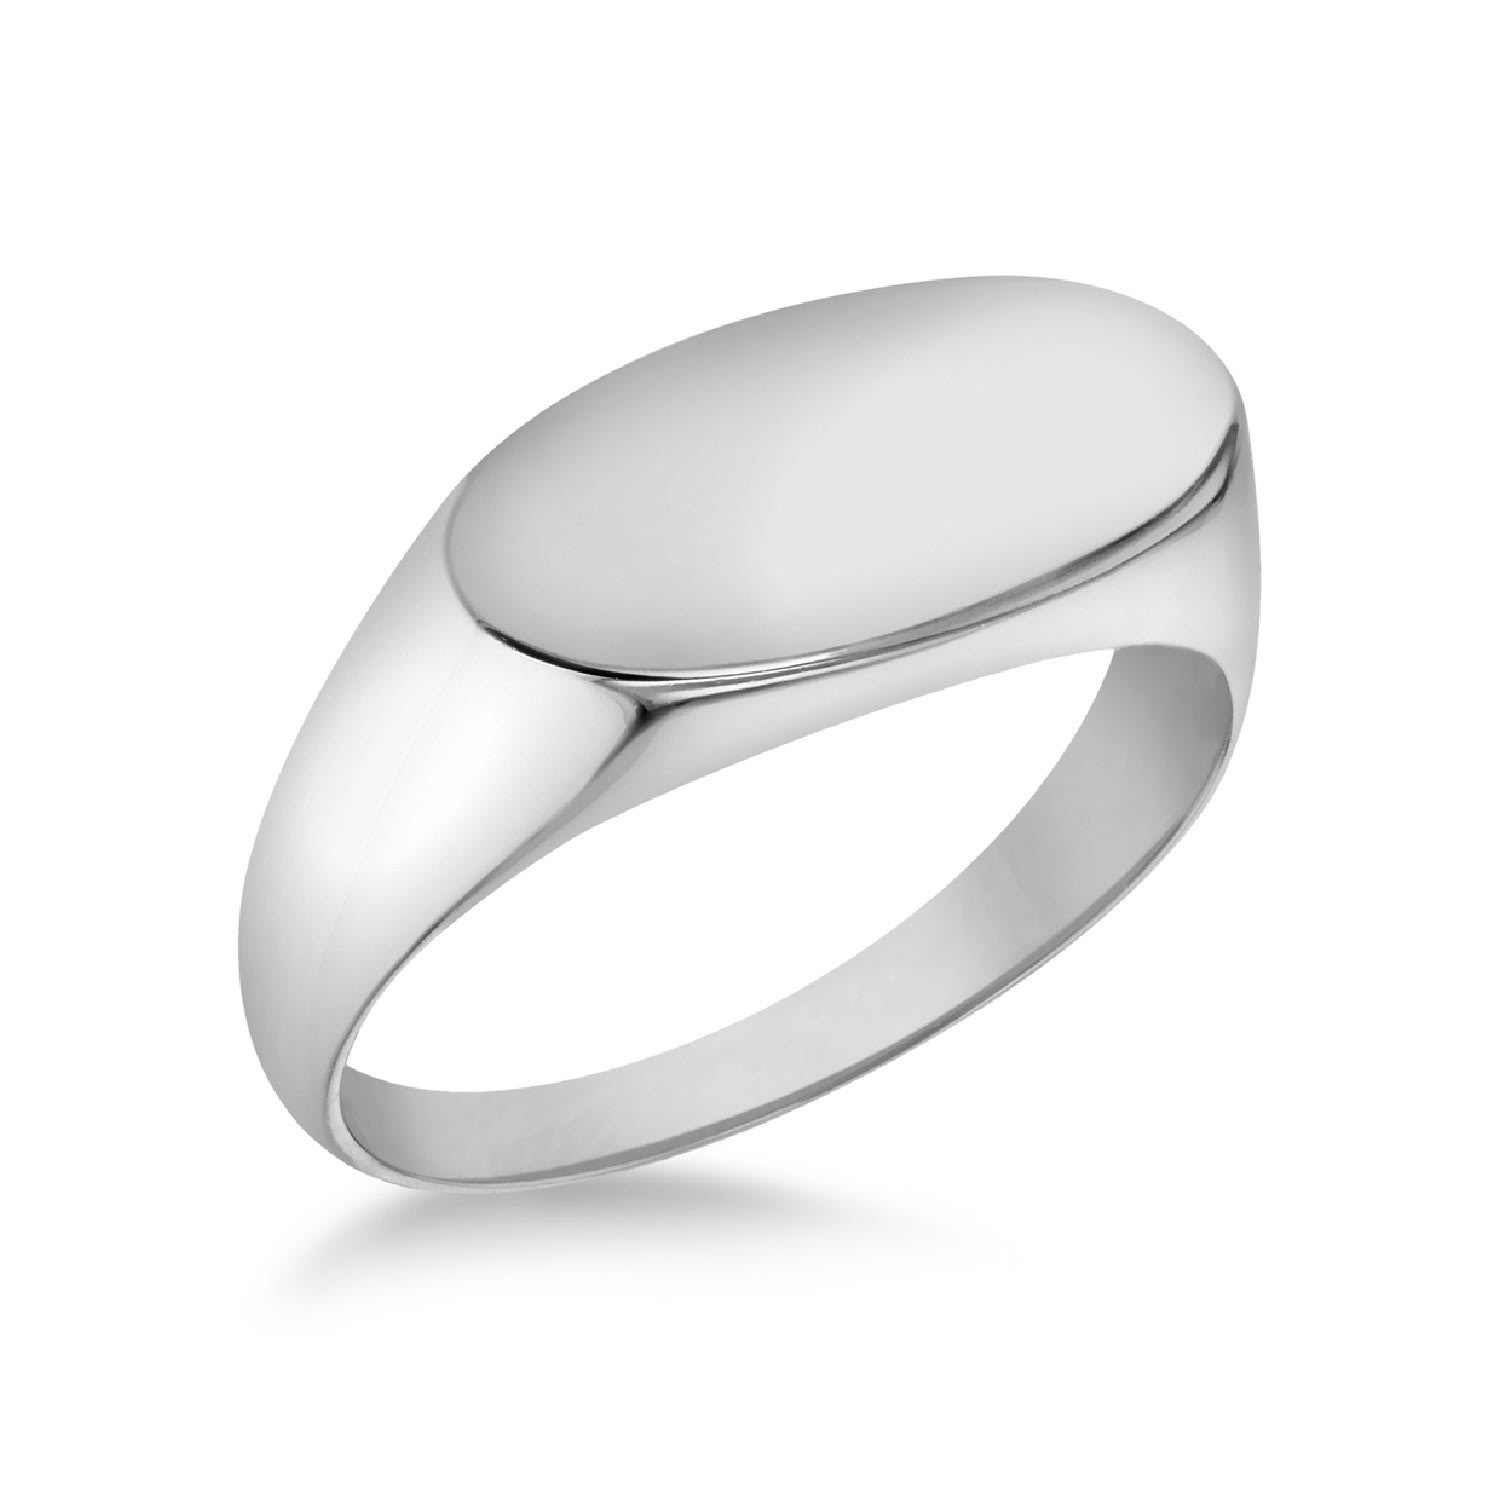 Sterling Silver Mens Oval Signet Ring Posh Totty Designs